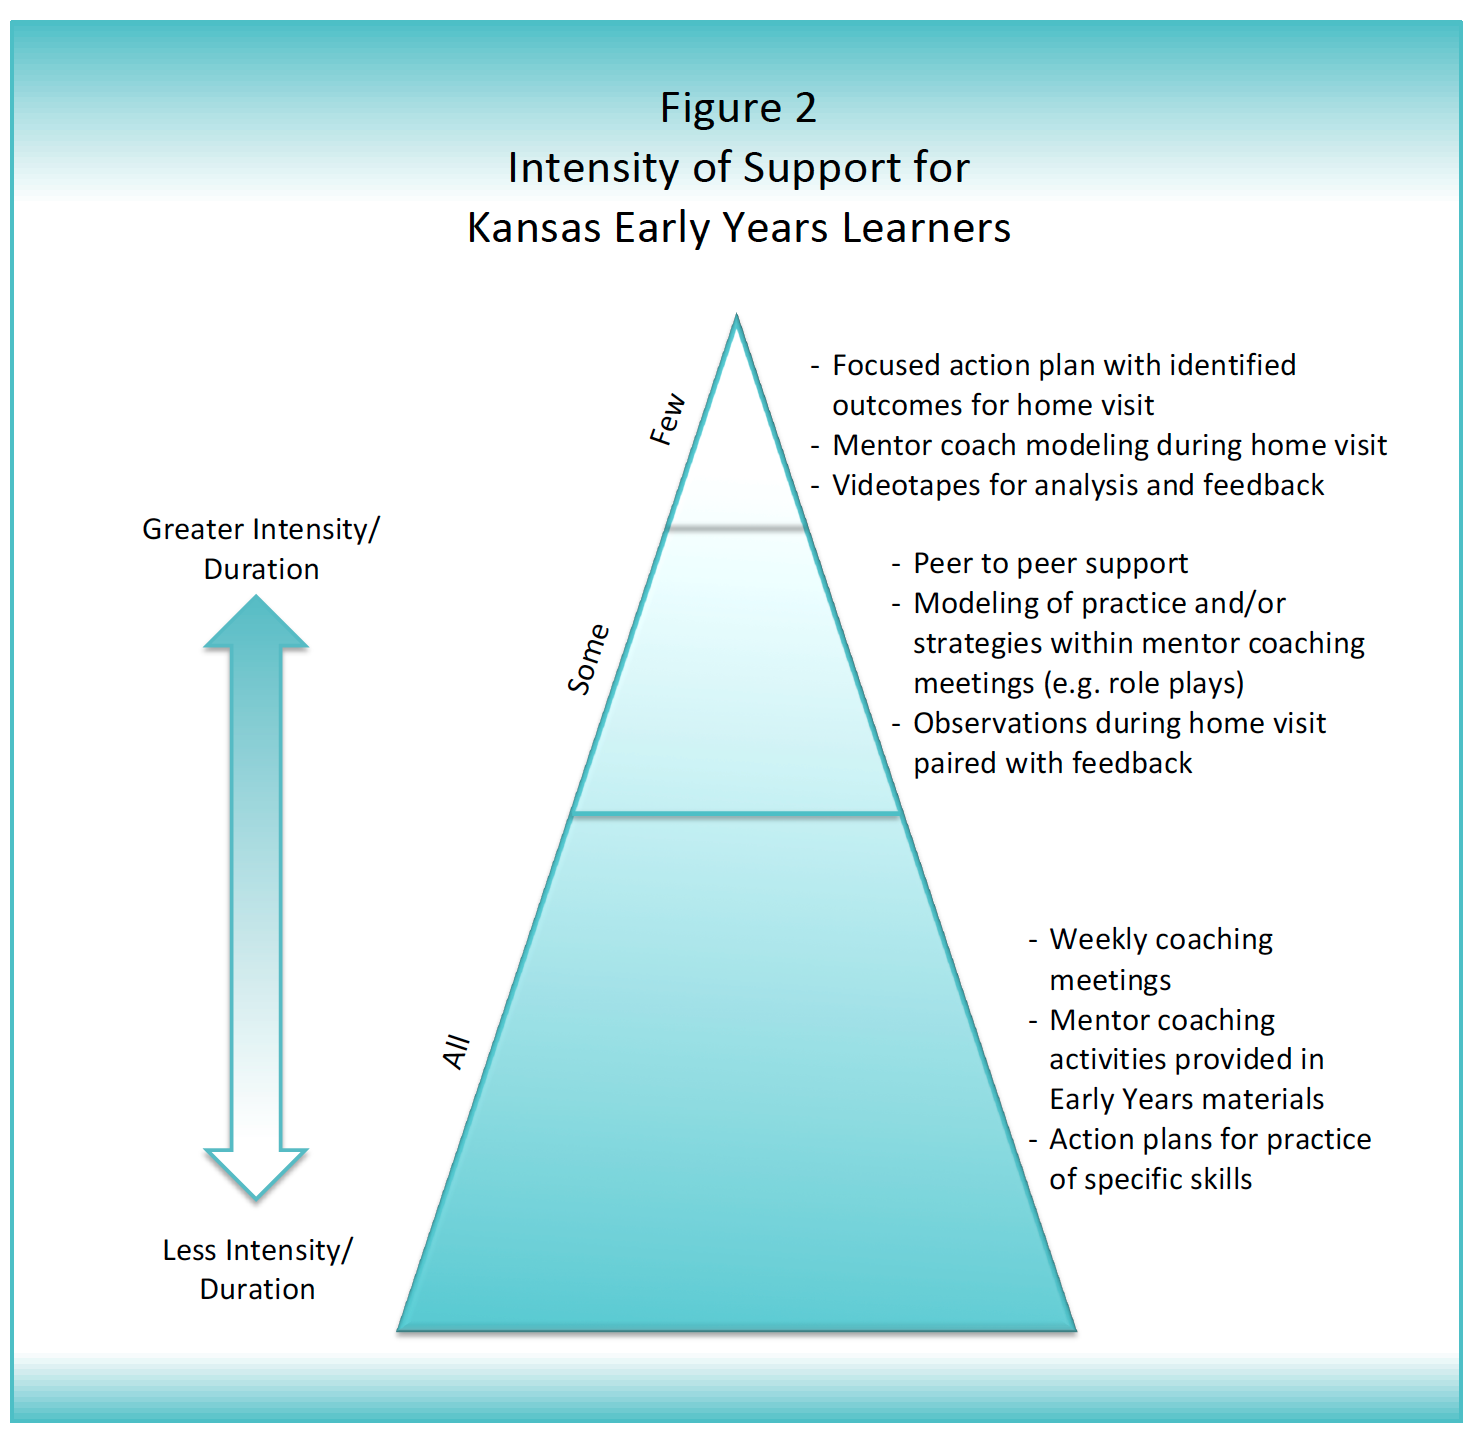 "Figure 2 illustrates the tiered coaching model for Kansas Early Years learners. "